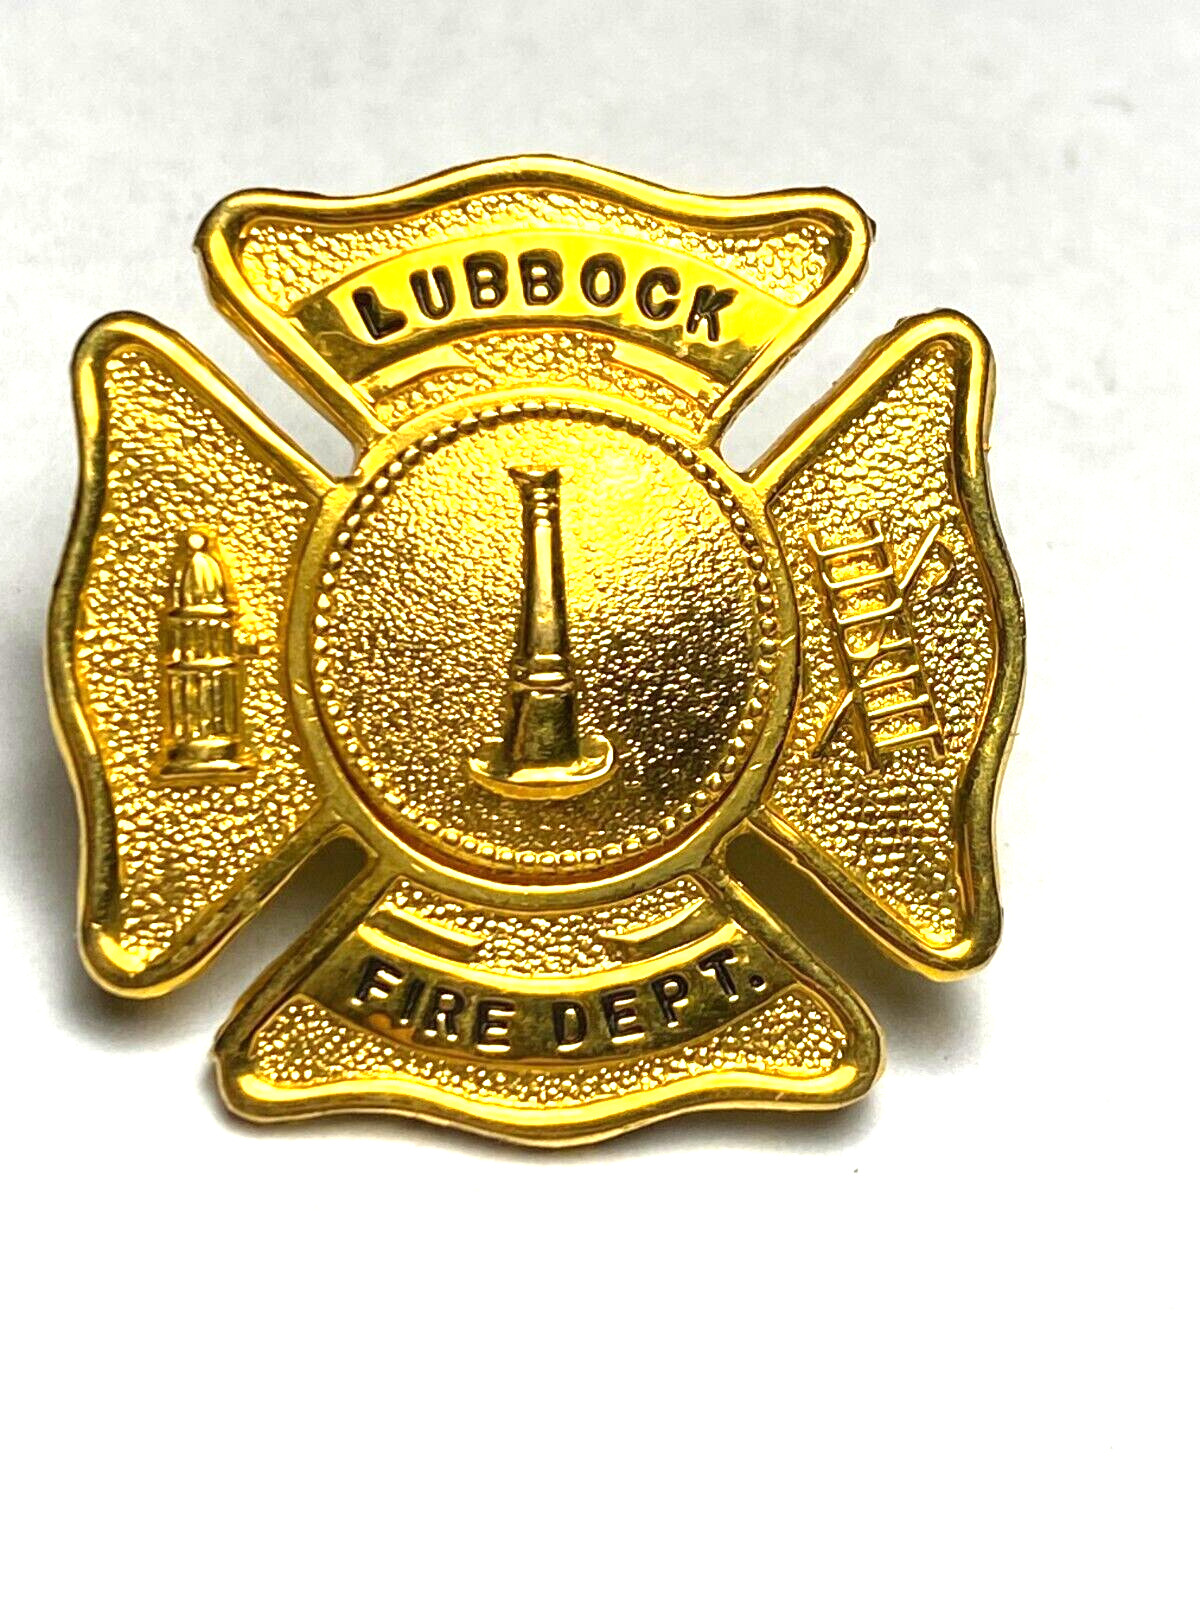 Antique Early OBSOLETE FIREMANS LUBBOCK TEXAS BADGE / Texas Fire Dept